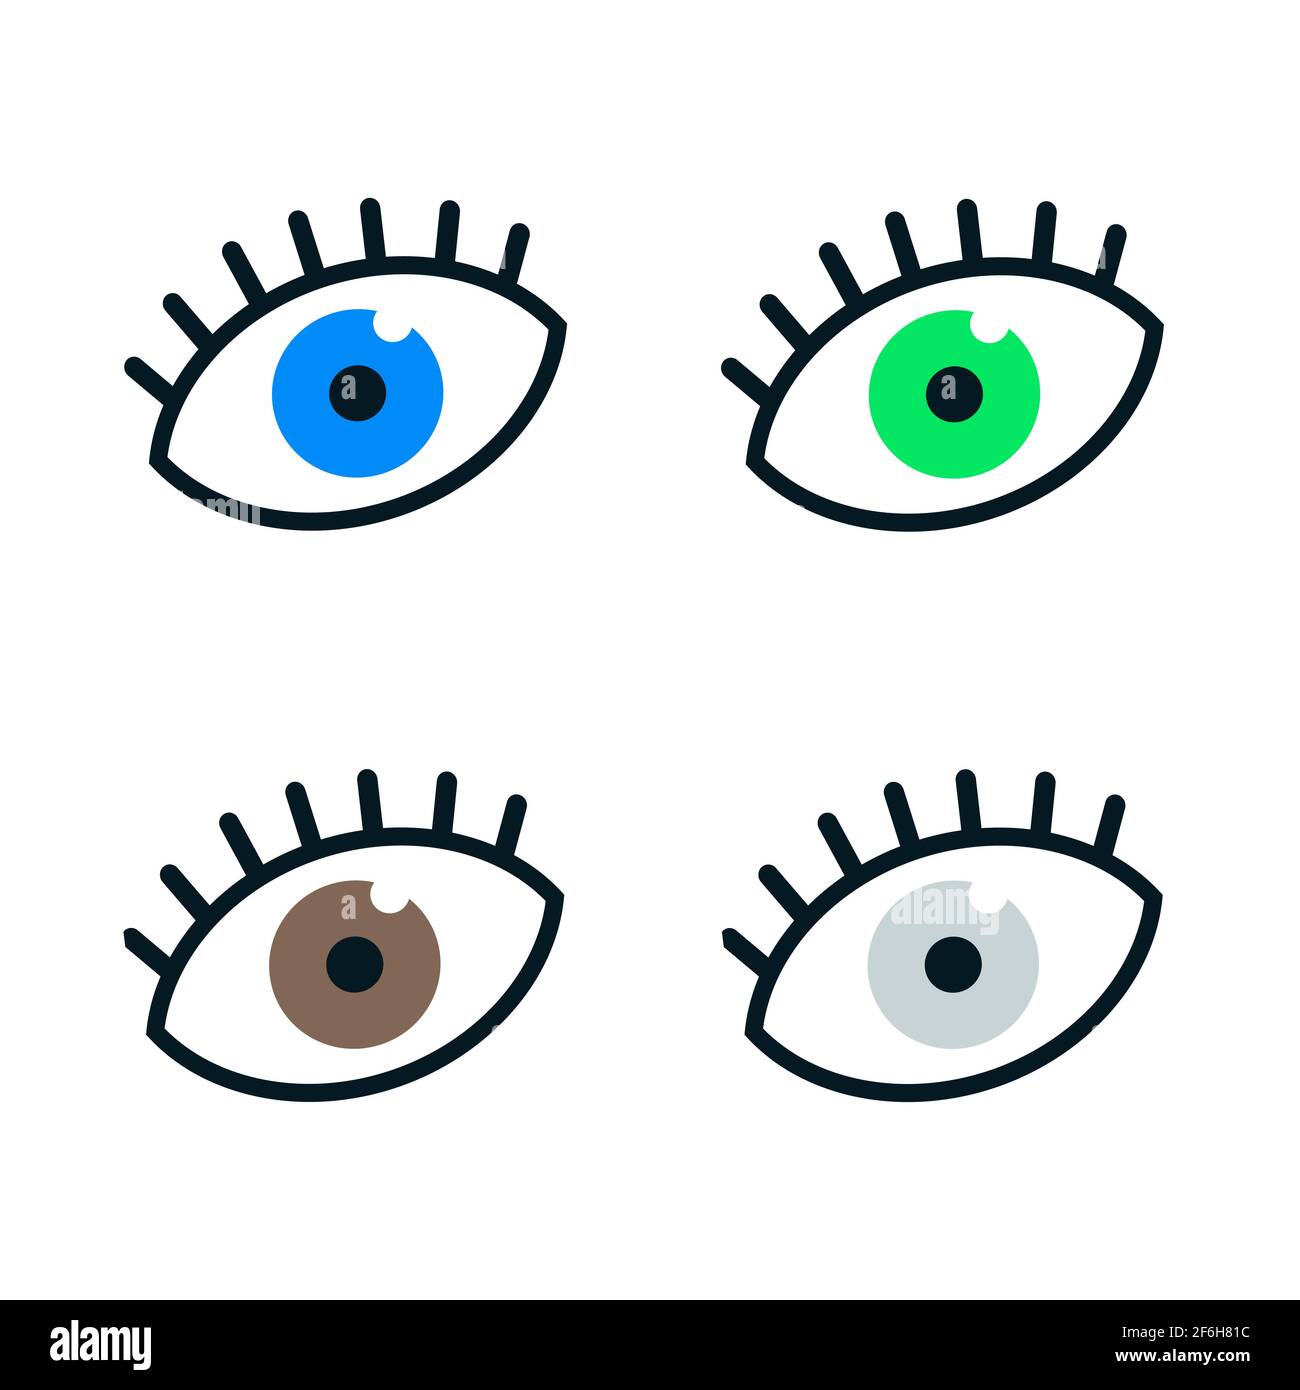 Eye colors set. Realistic eyeballs get. Different colored eyes: brown, blue, green, grey. Stock Vector